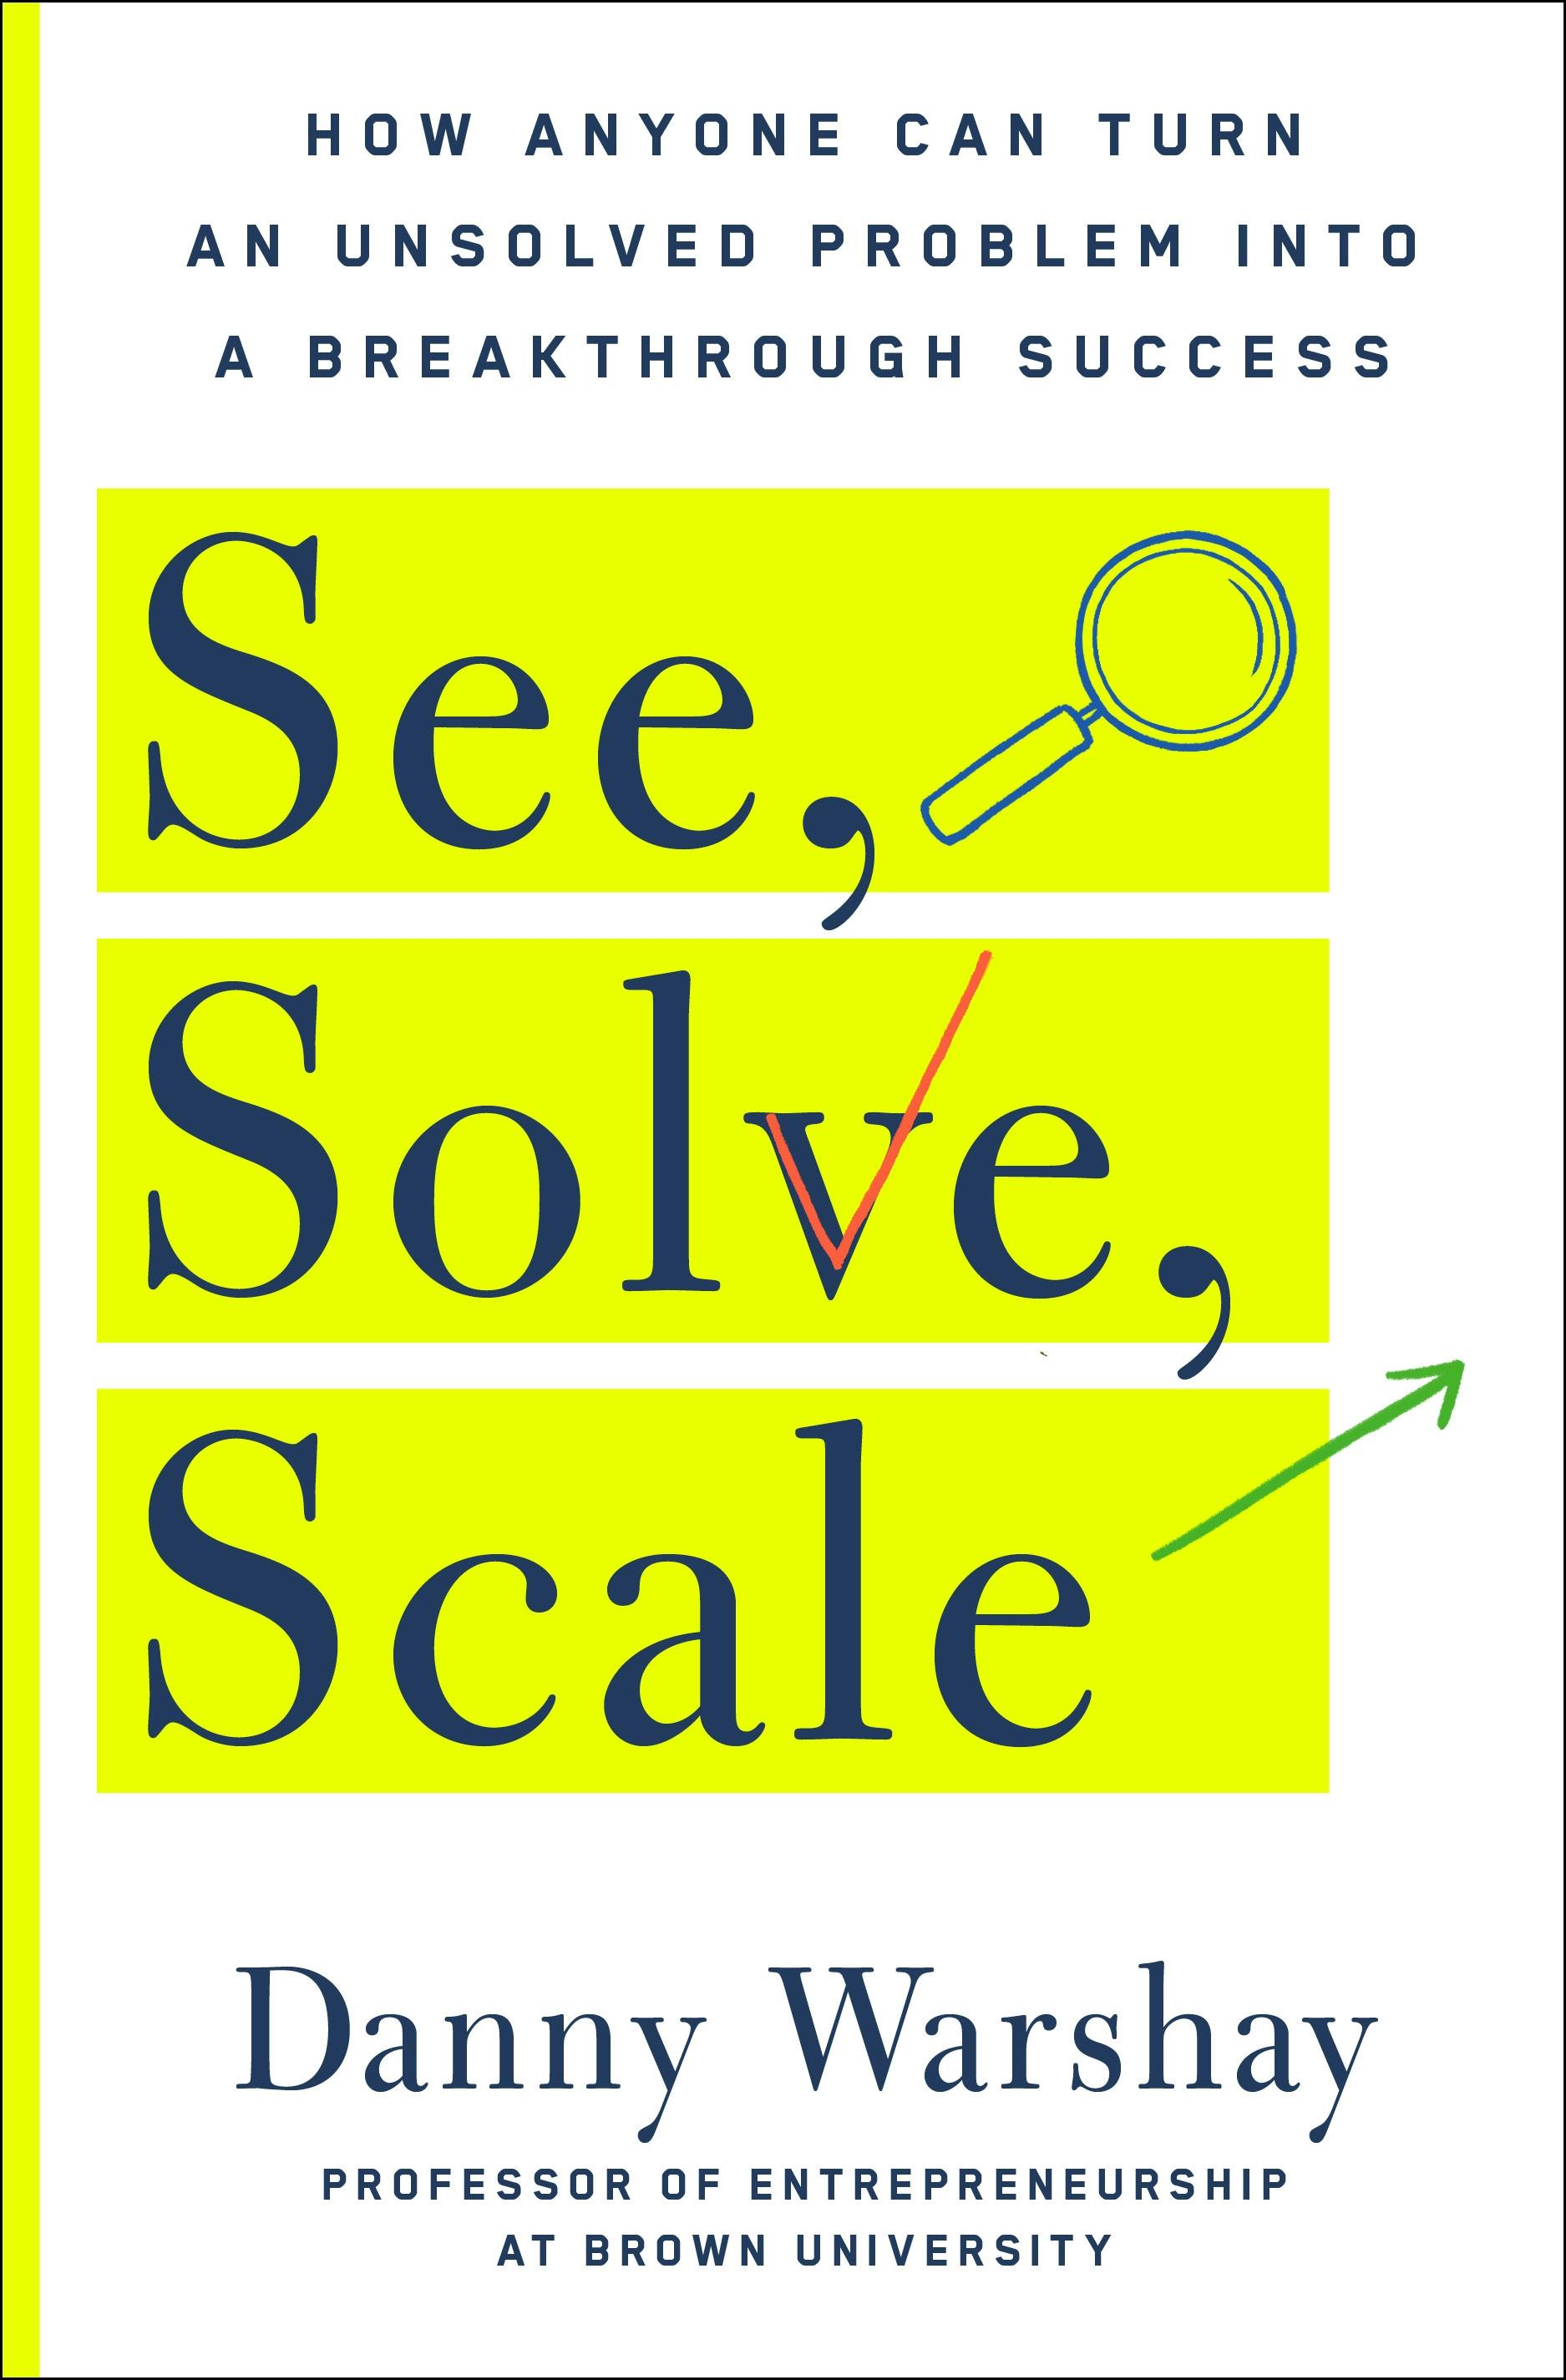 Describes for See, Solve, Scale by authors